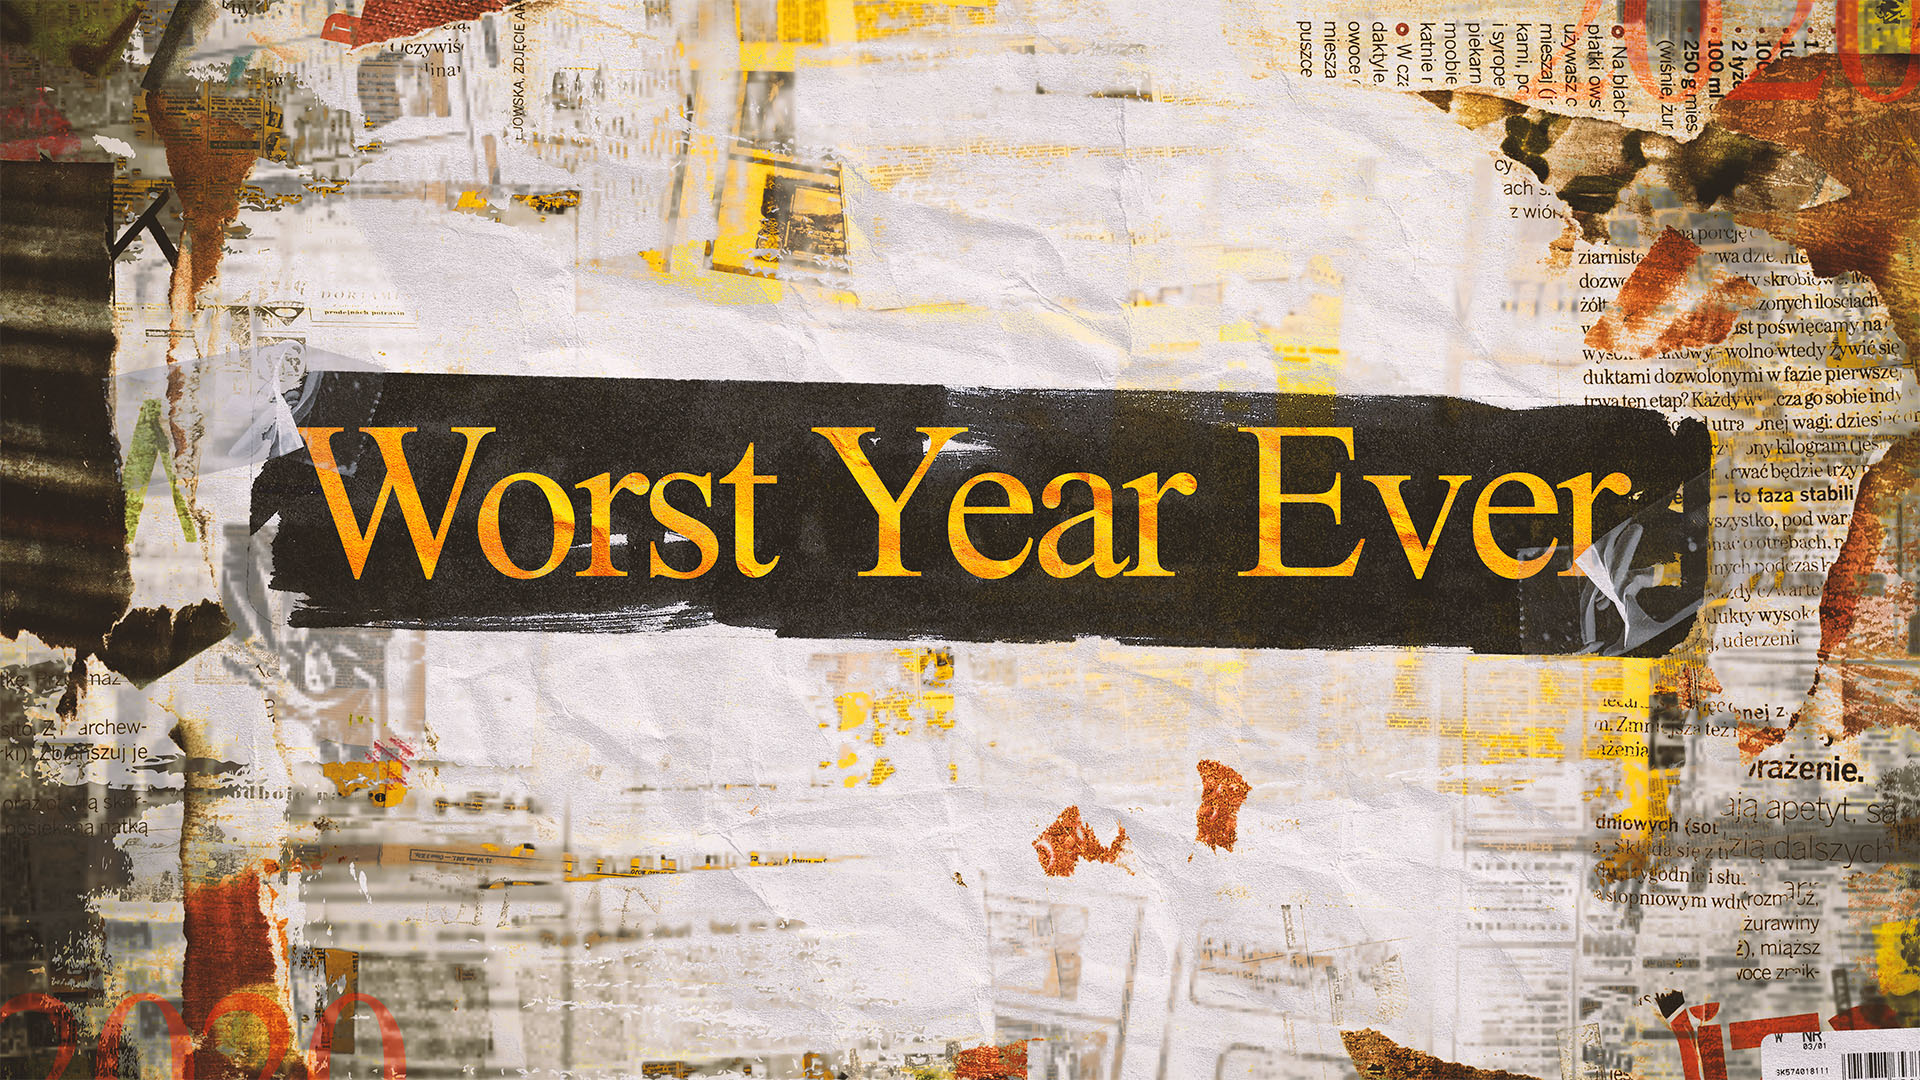 "Worst Year Ever" Message